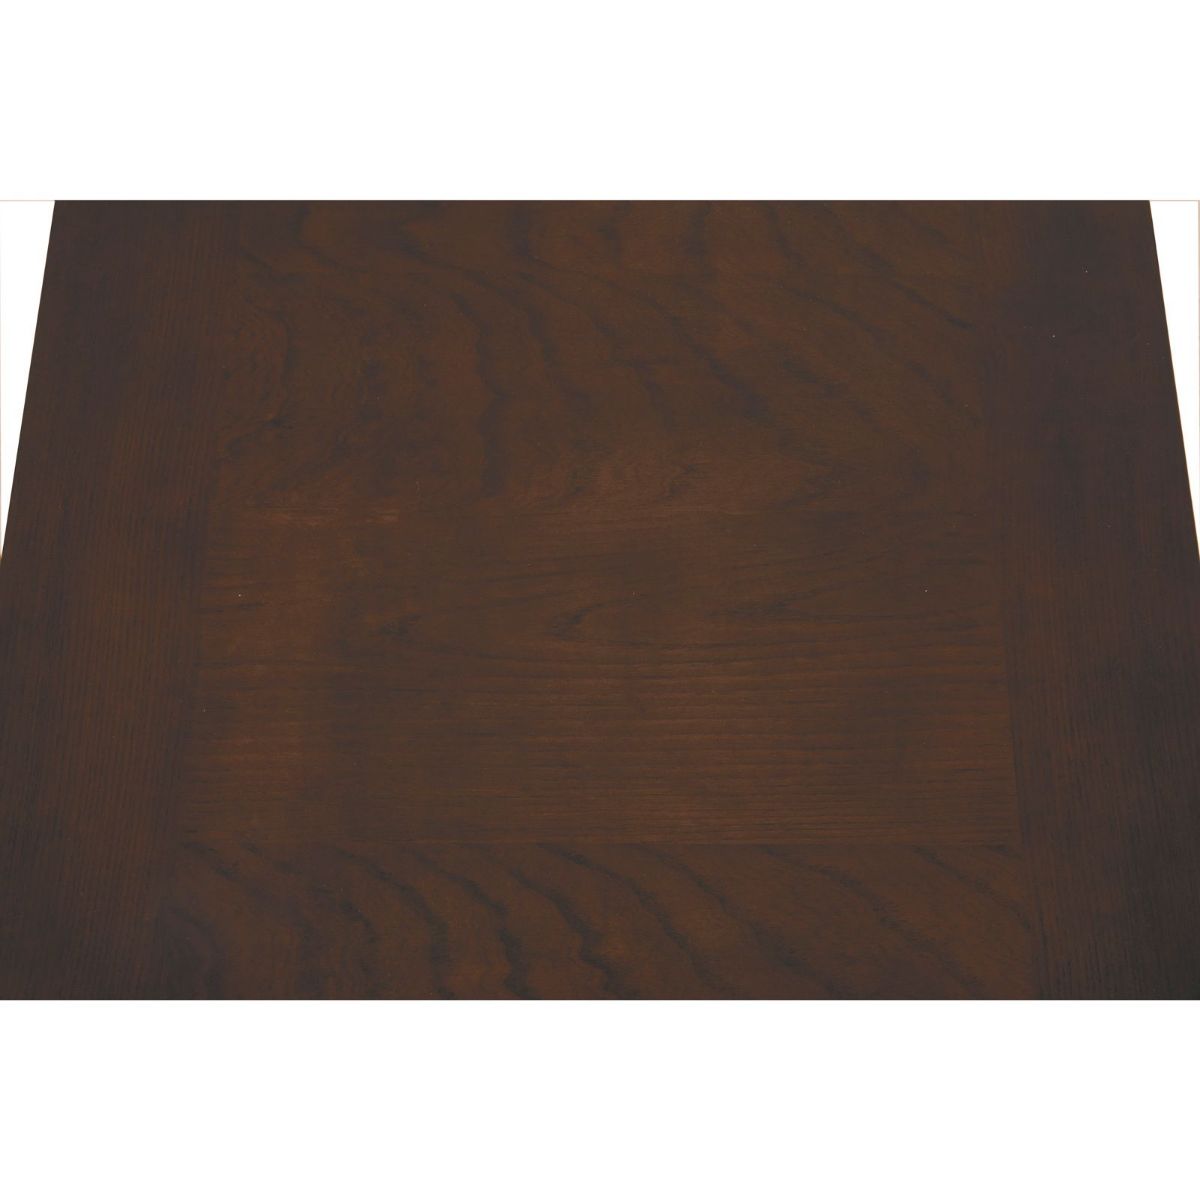 Picture of Watson Square End Table